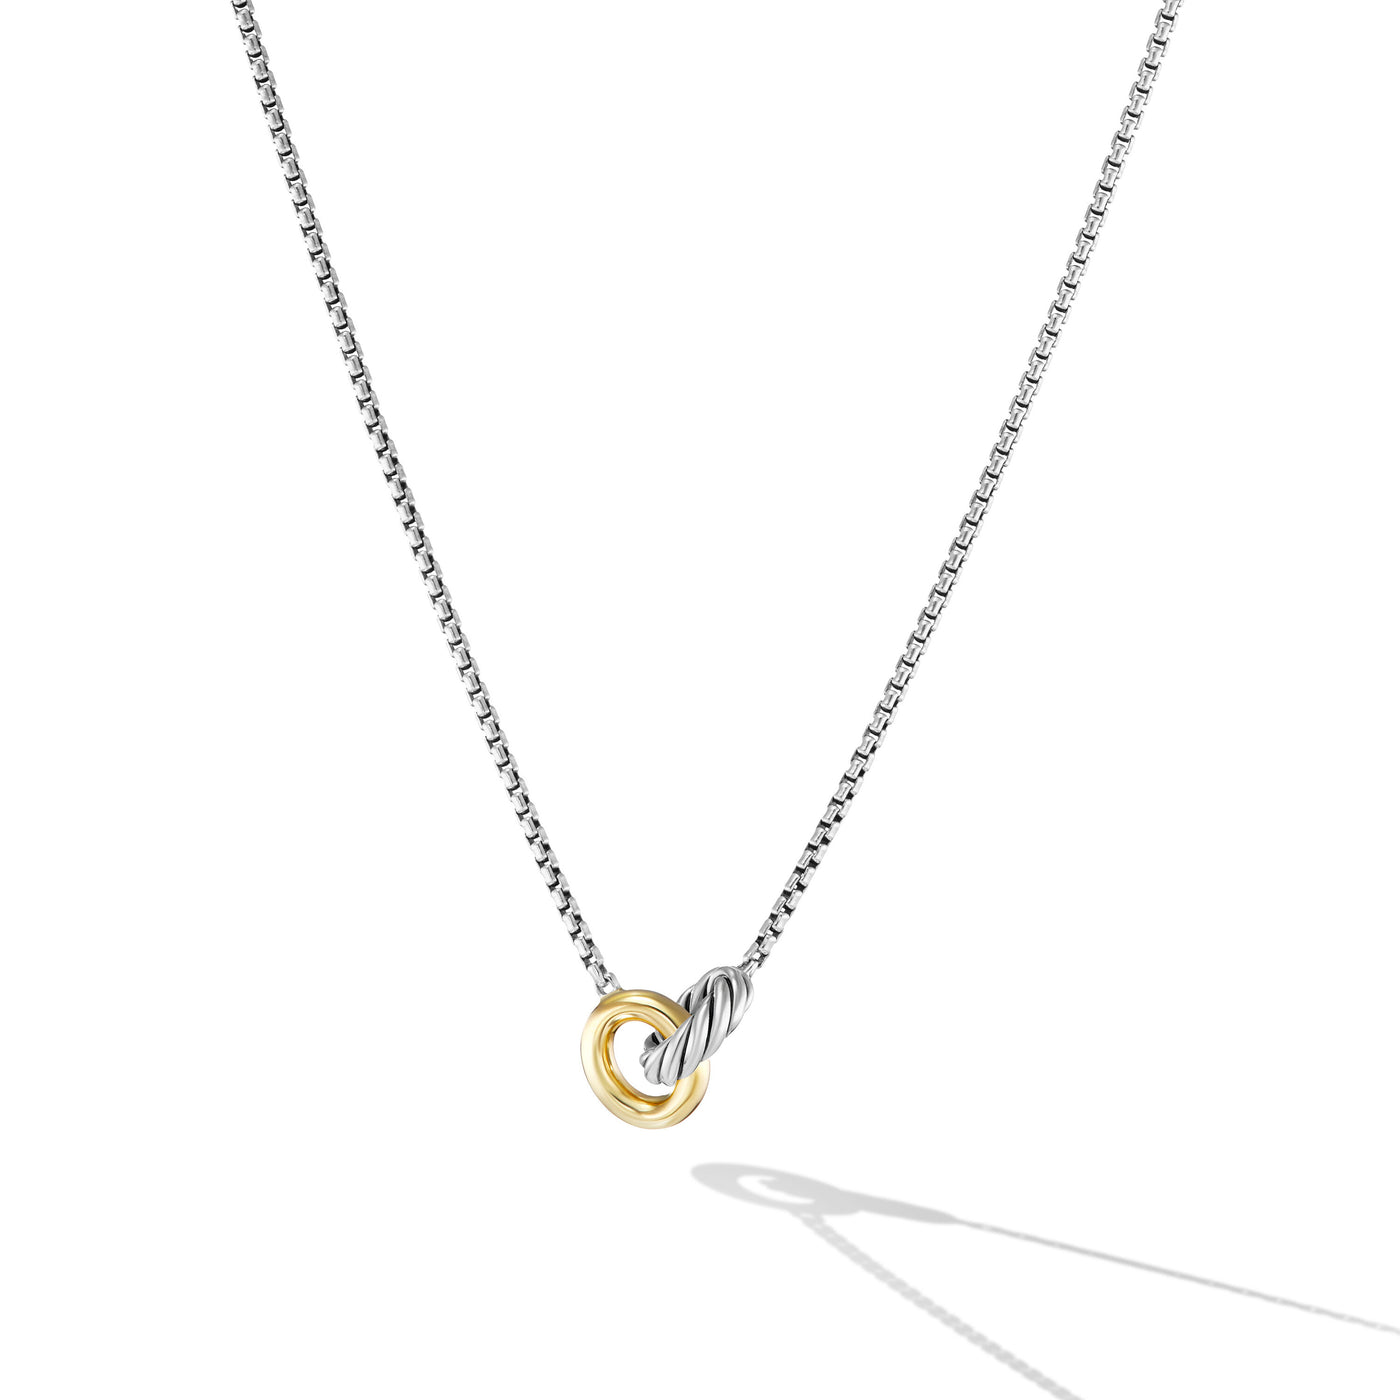 Petite Cable Linked Necklace in Sterling Silver with 14K Yellow Gold\, 15mm